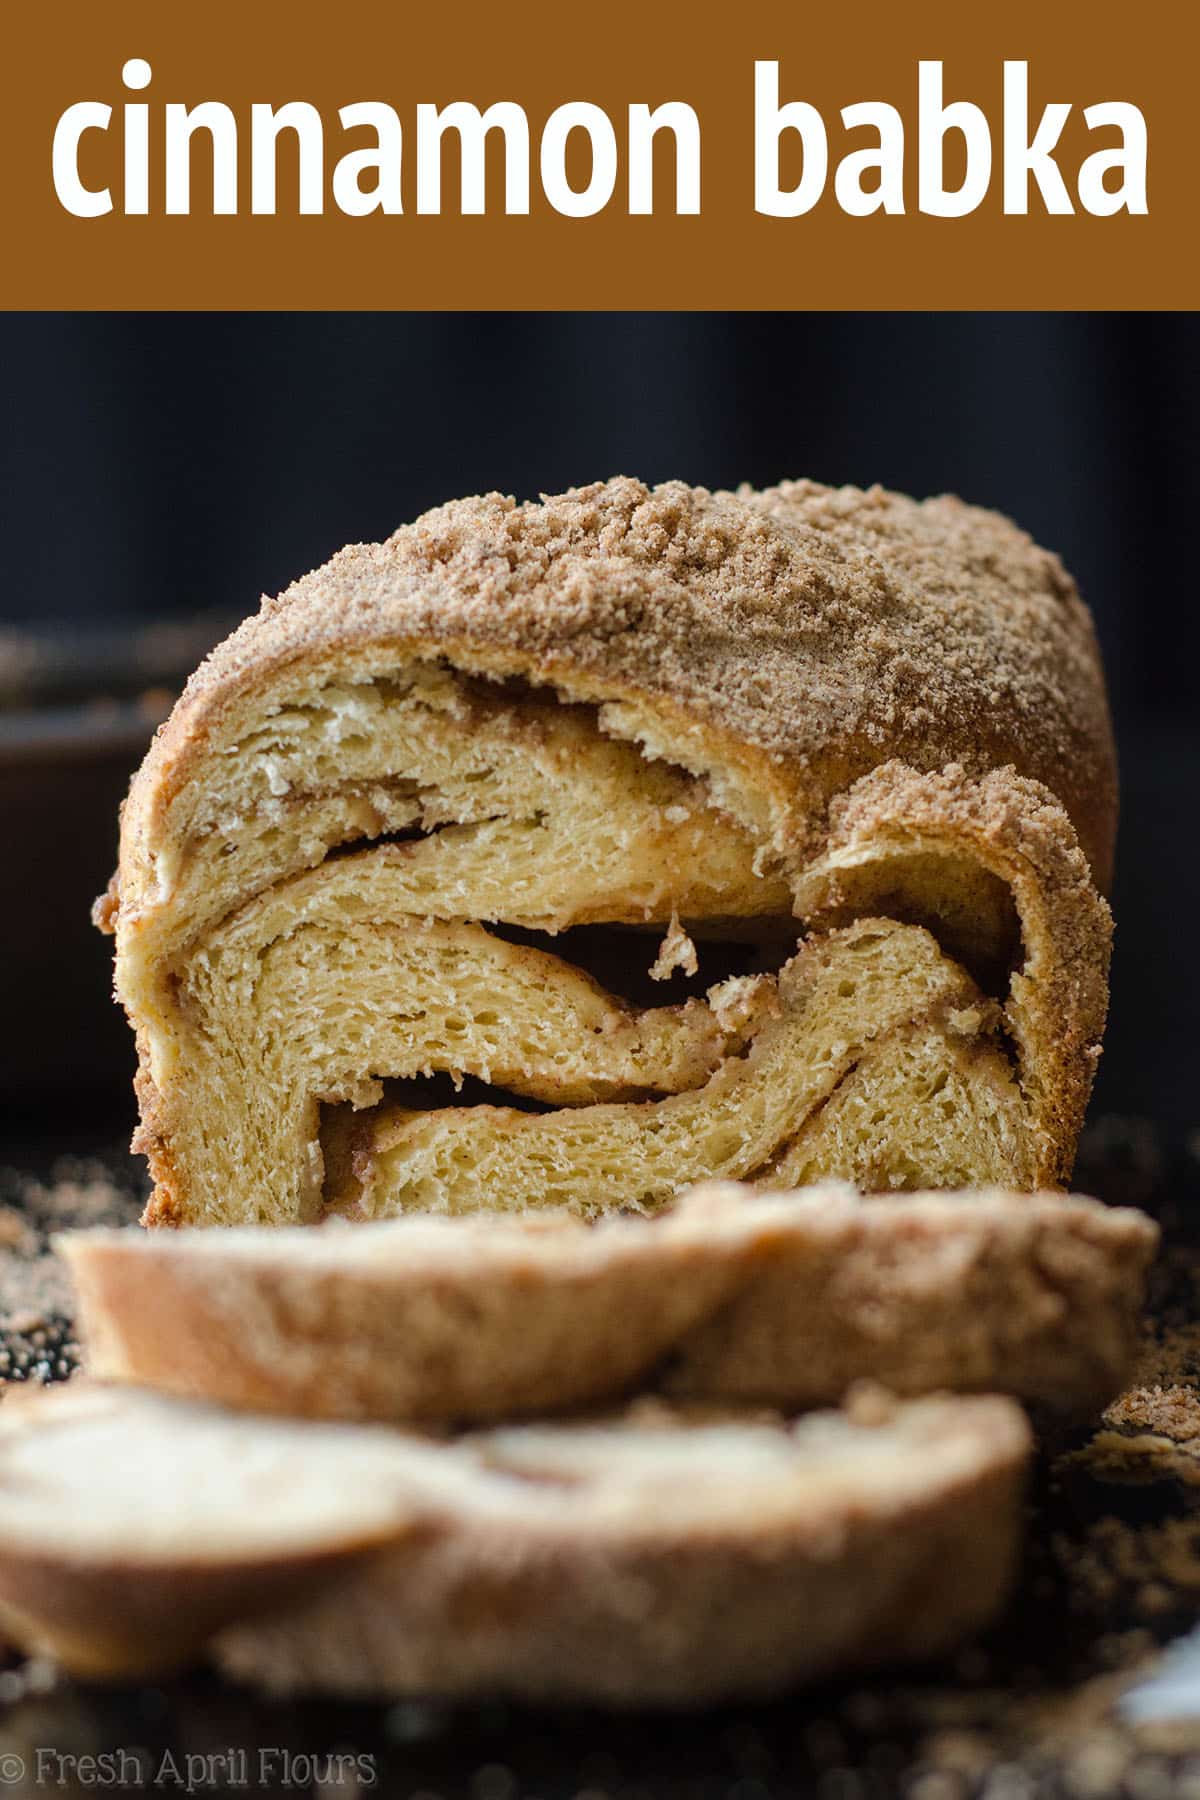 Cinnamon Babka: A simple twisted yeast bread with a cinnamon sugar filling and topped with cinnamon streusel. This loaf of bread tastes like a big cinnamon bun! via @frshaprilflours